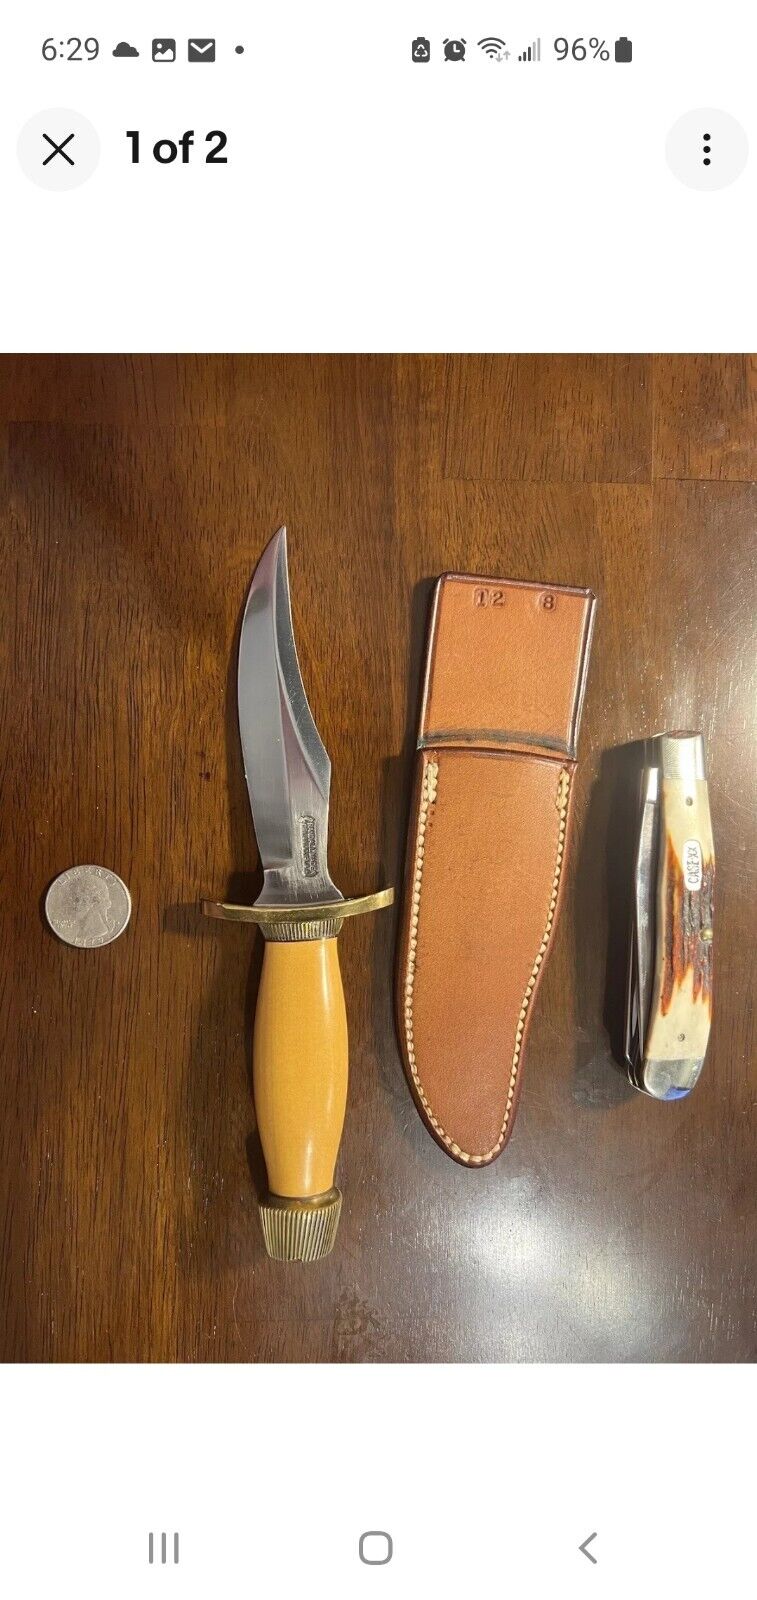 Vintage Randall Made Knife SCAMMER BEWARE It was my Dads Navy knife. READ ALL